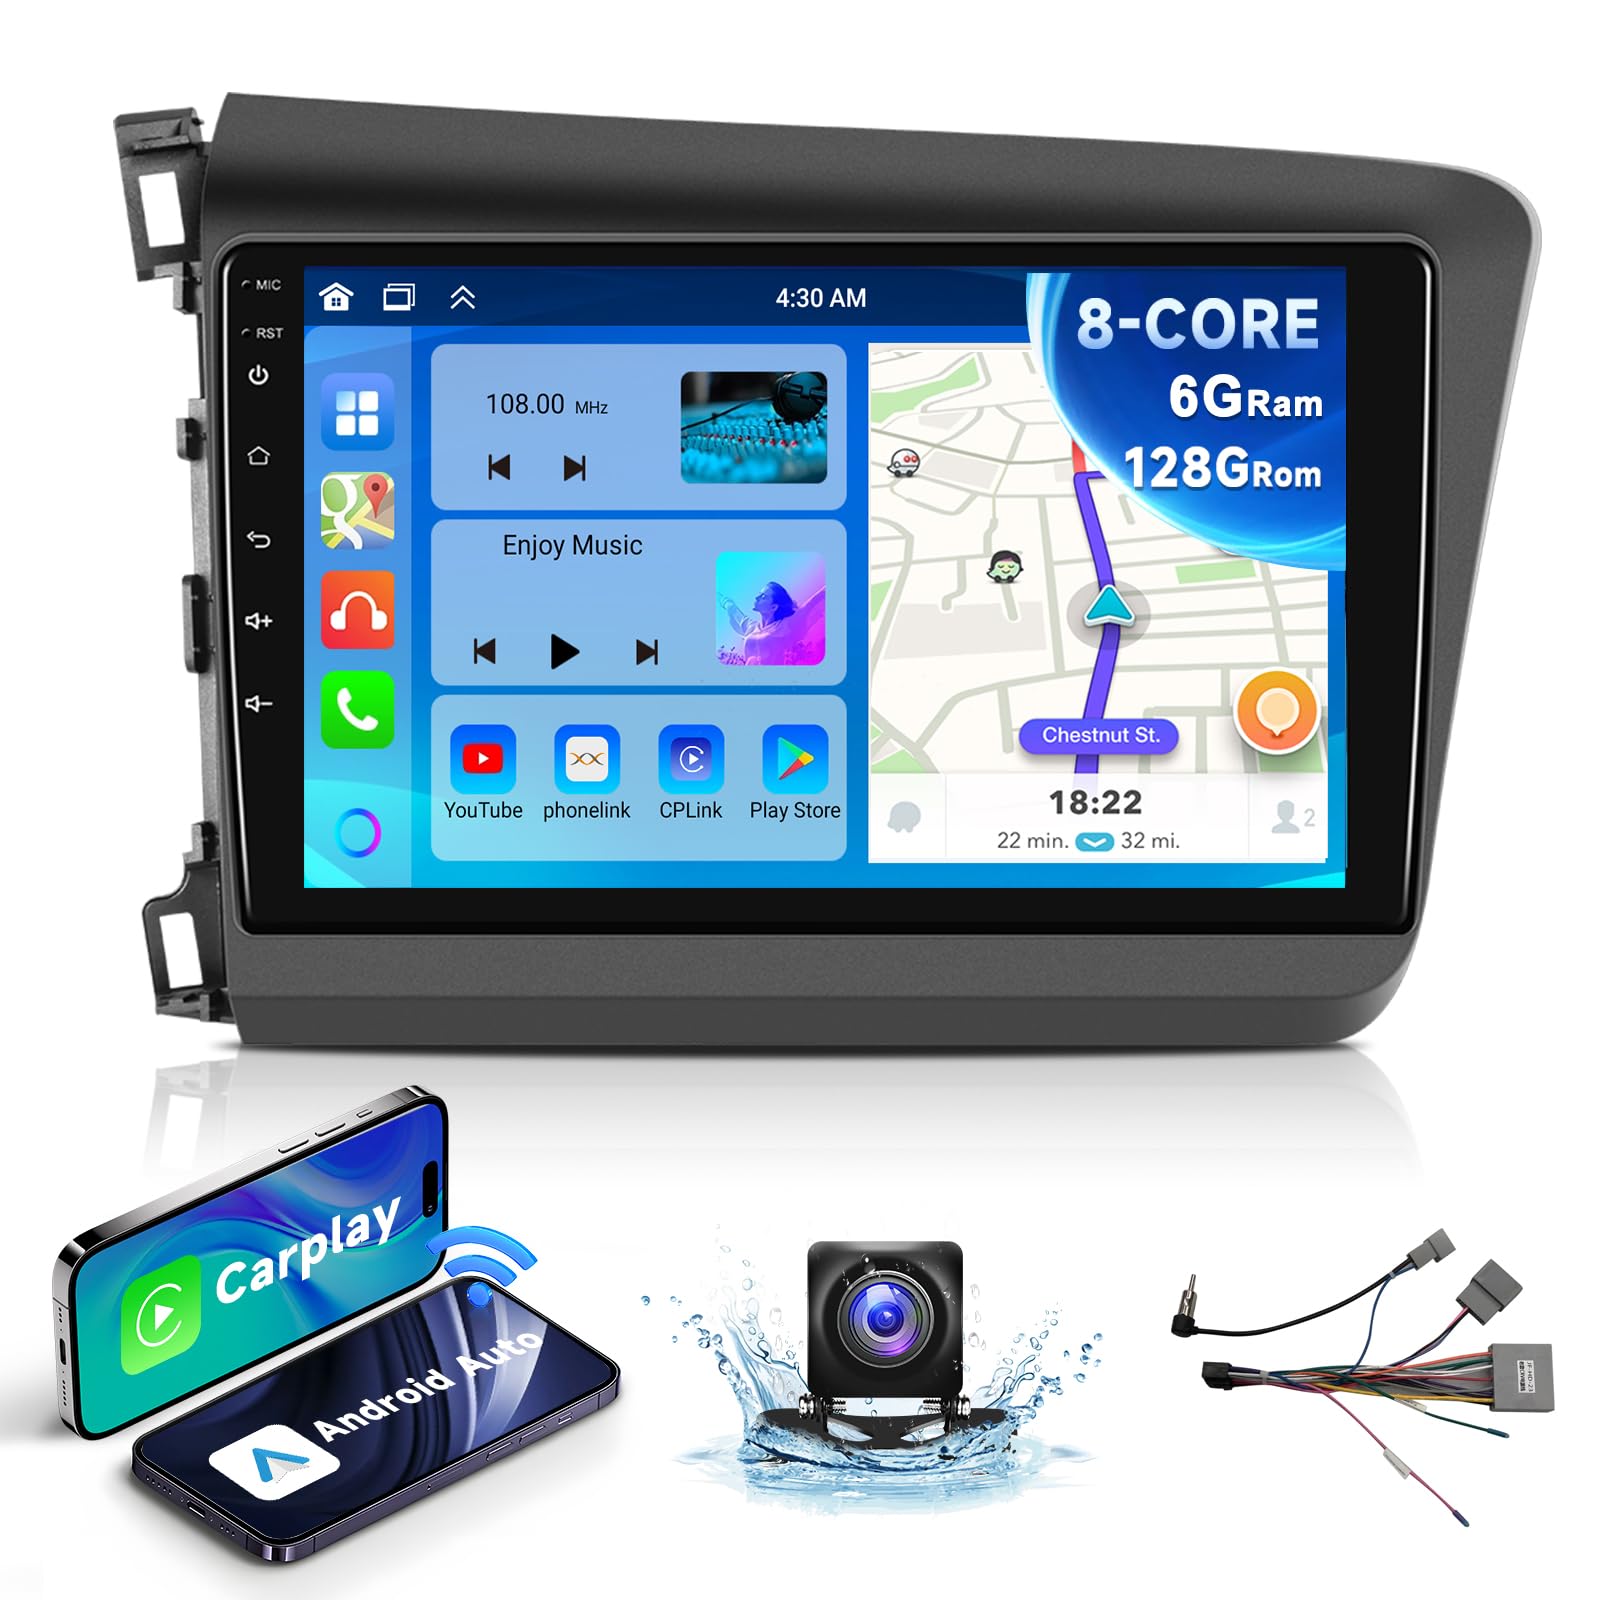 8-core 6G+128G Car Radio for Honda Civic 2012 2013 2014 2015, Wireless Apple Carplay Android Auto Car Stereo, 9" IPS Touchscreen with WiFi, GPS, Bluetooth,FM/RDS, 32EQ DSP, Rear Camera